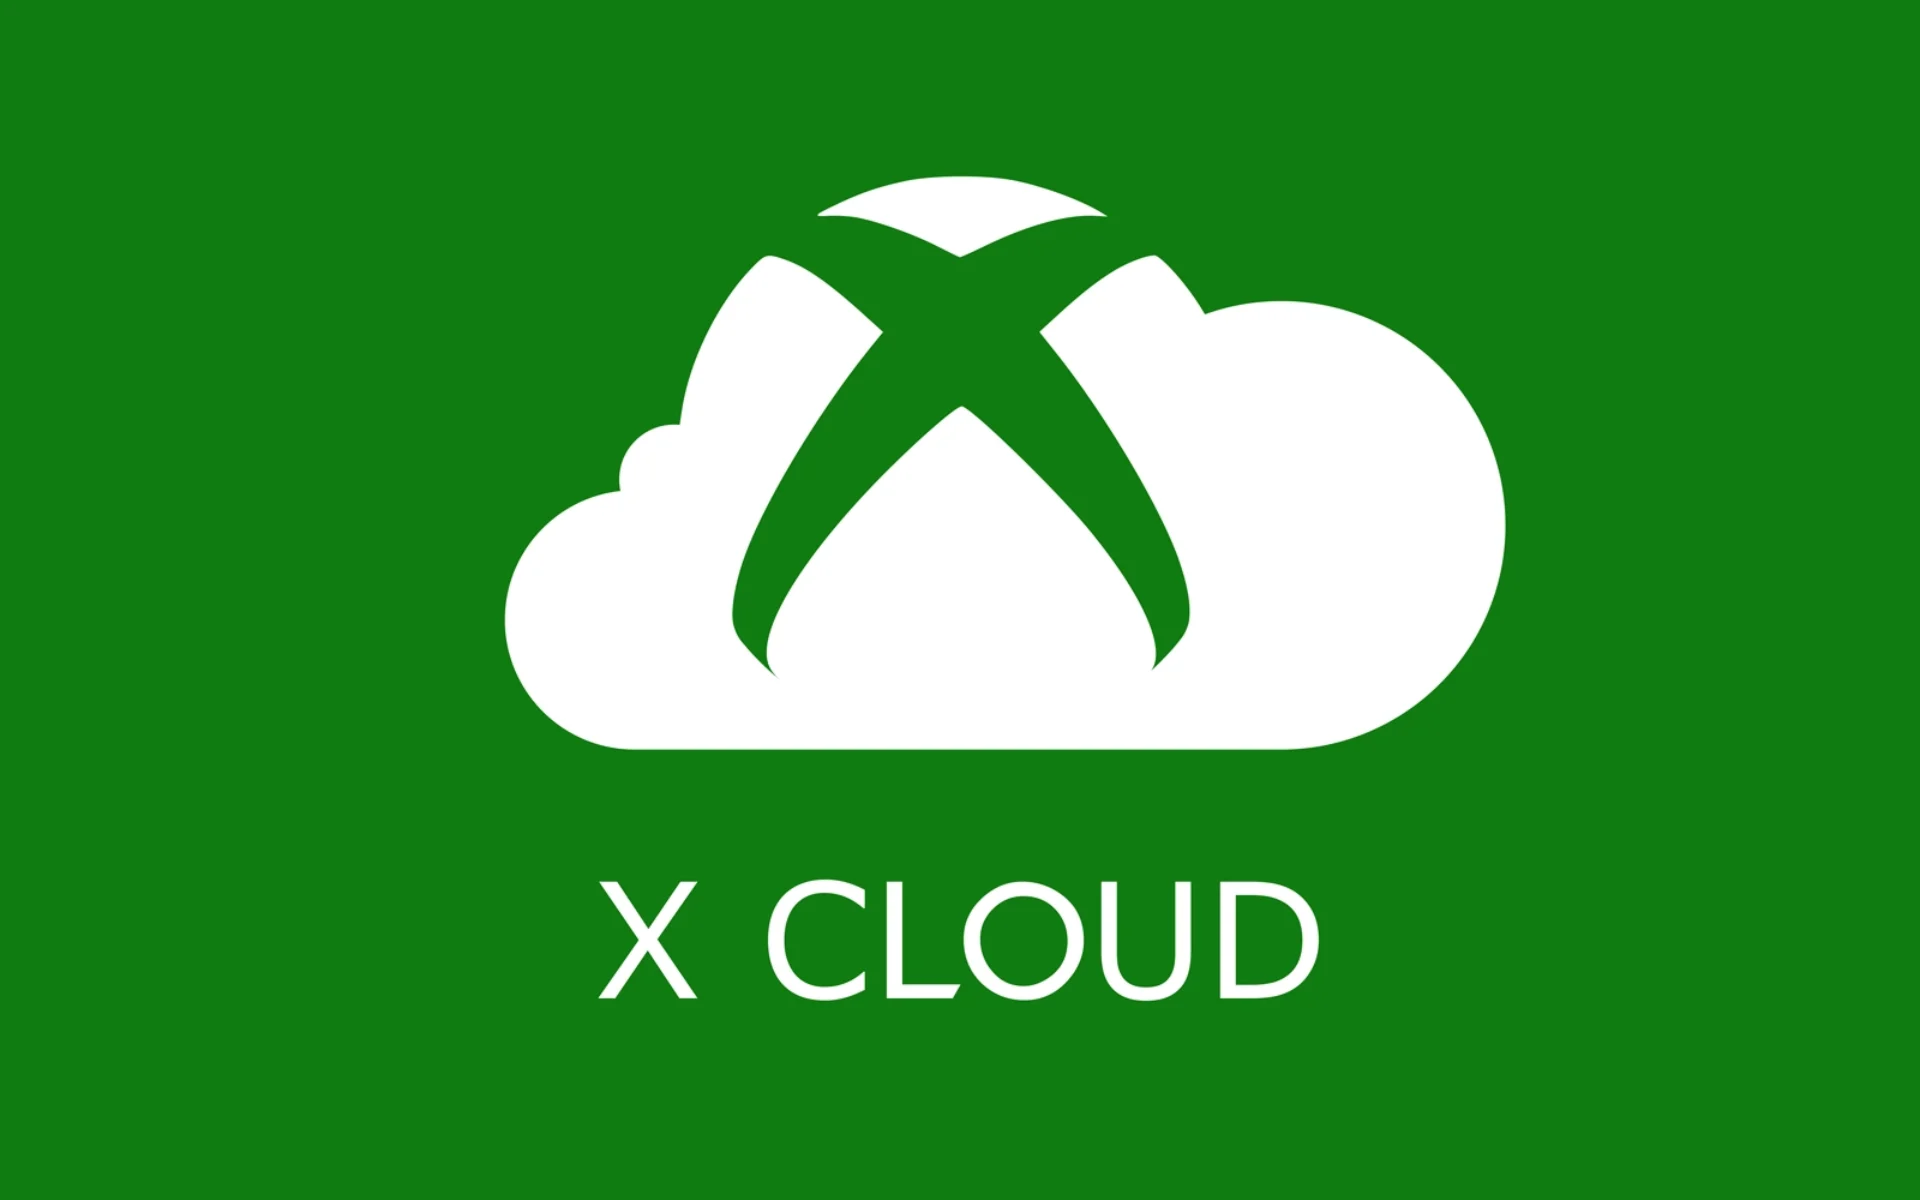 Microsoft's cloud gaming service is coming to Xbox One and Xbox